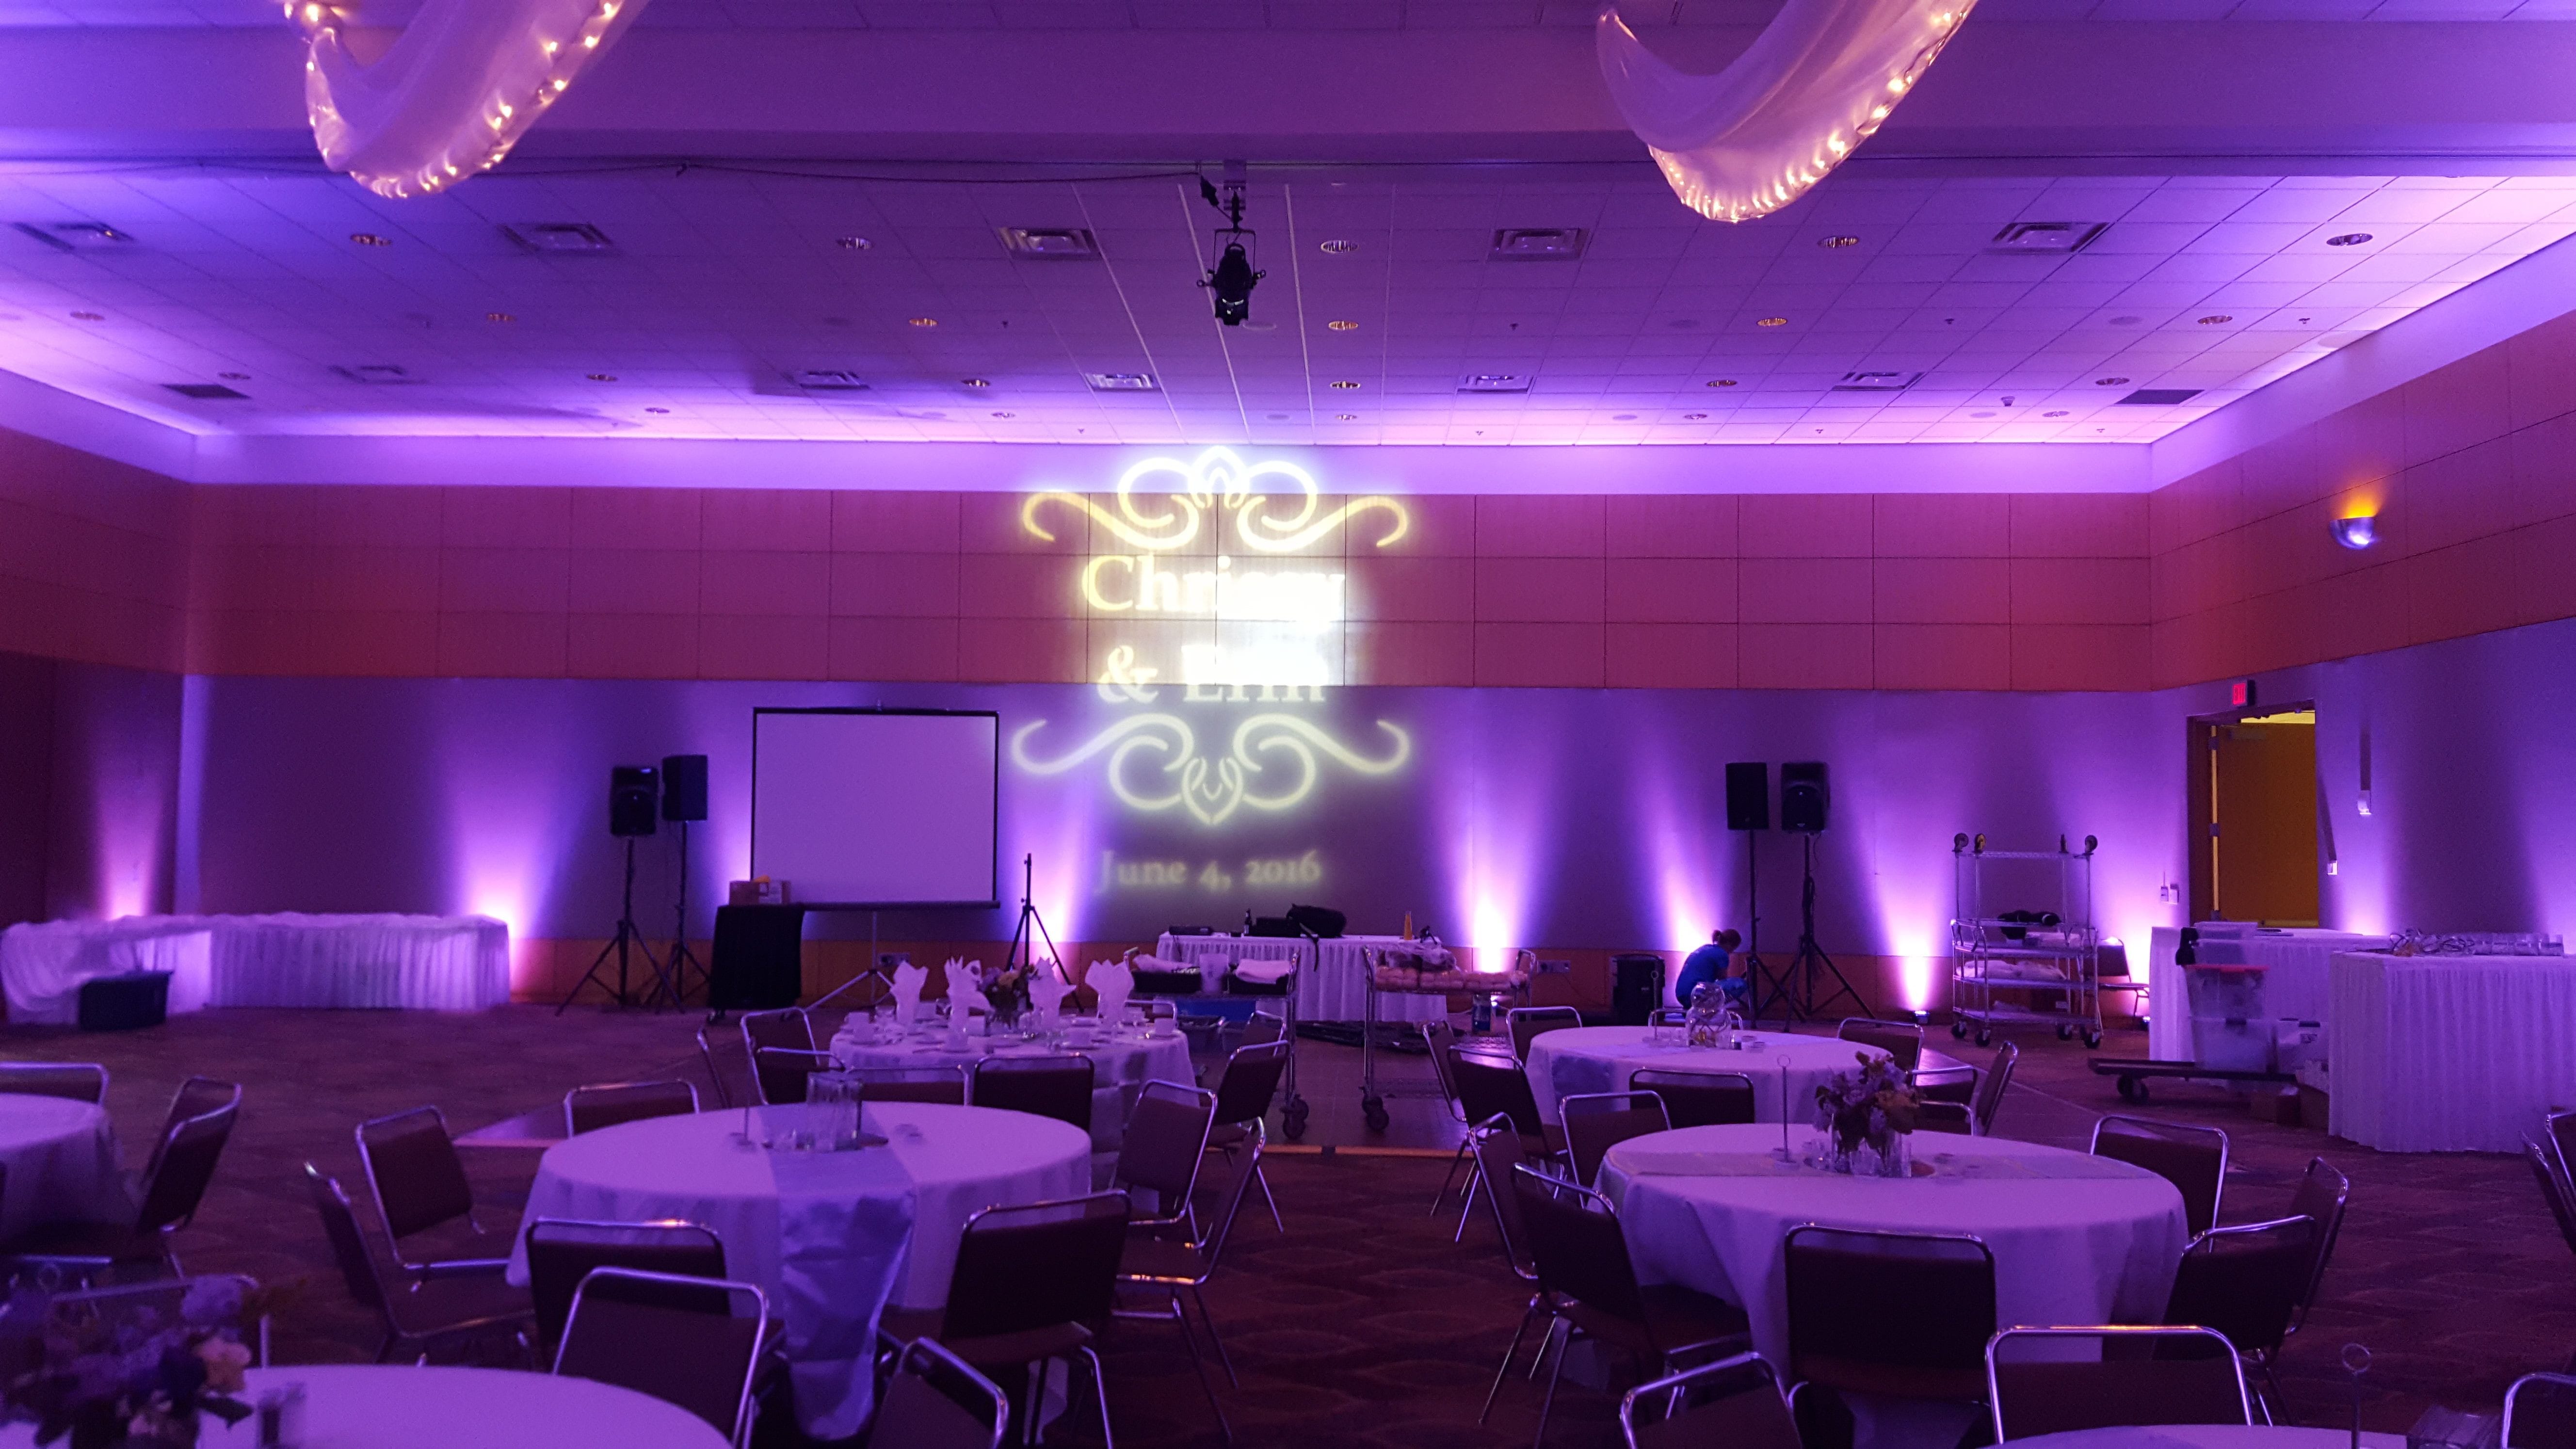 Wedding lighting in the Horizon Room at the DECC. Up lighting in lavender with a wedding monogram.